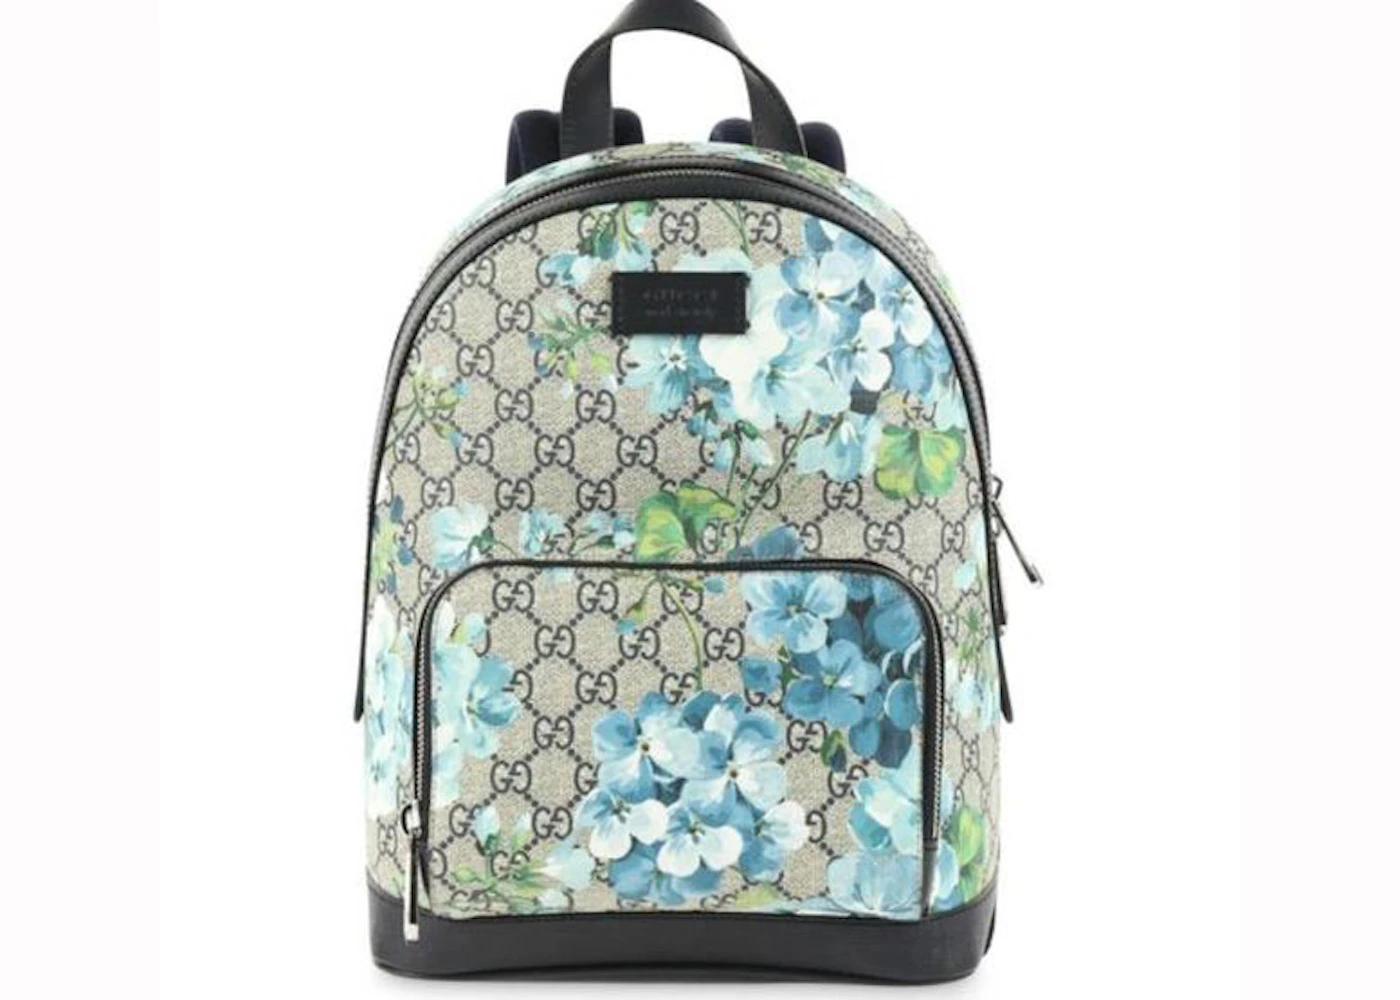 Ophidia GG small backpack in beige and blue GG Supreme